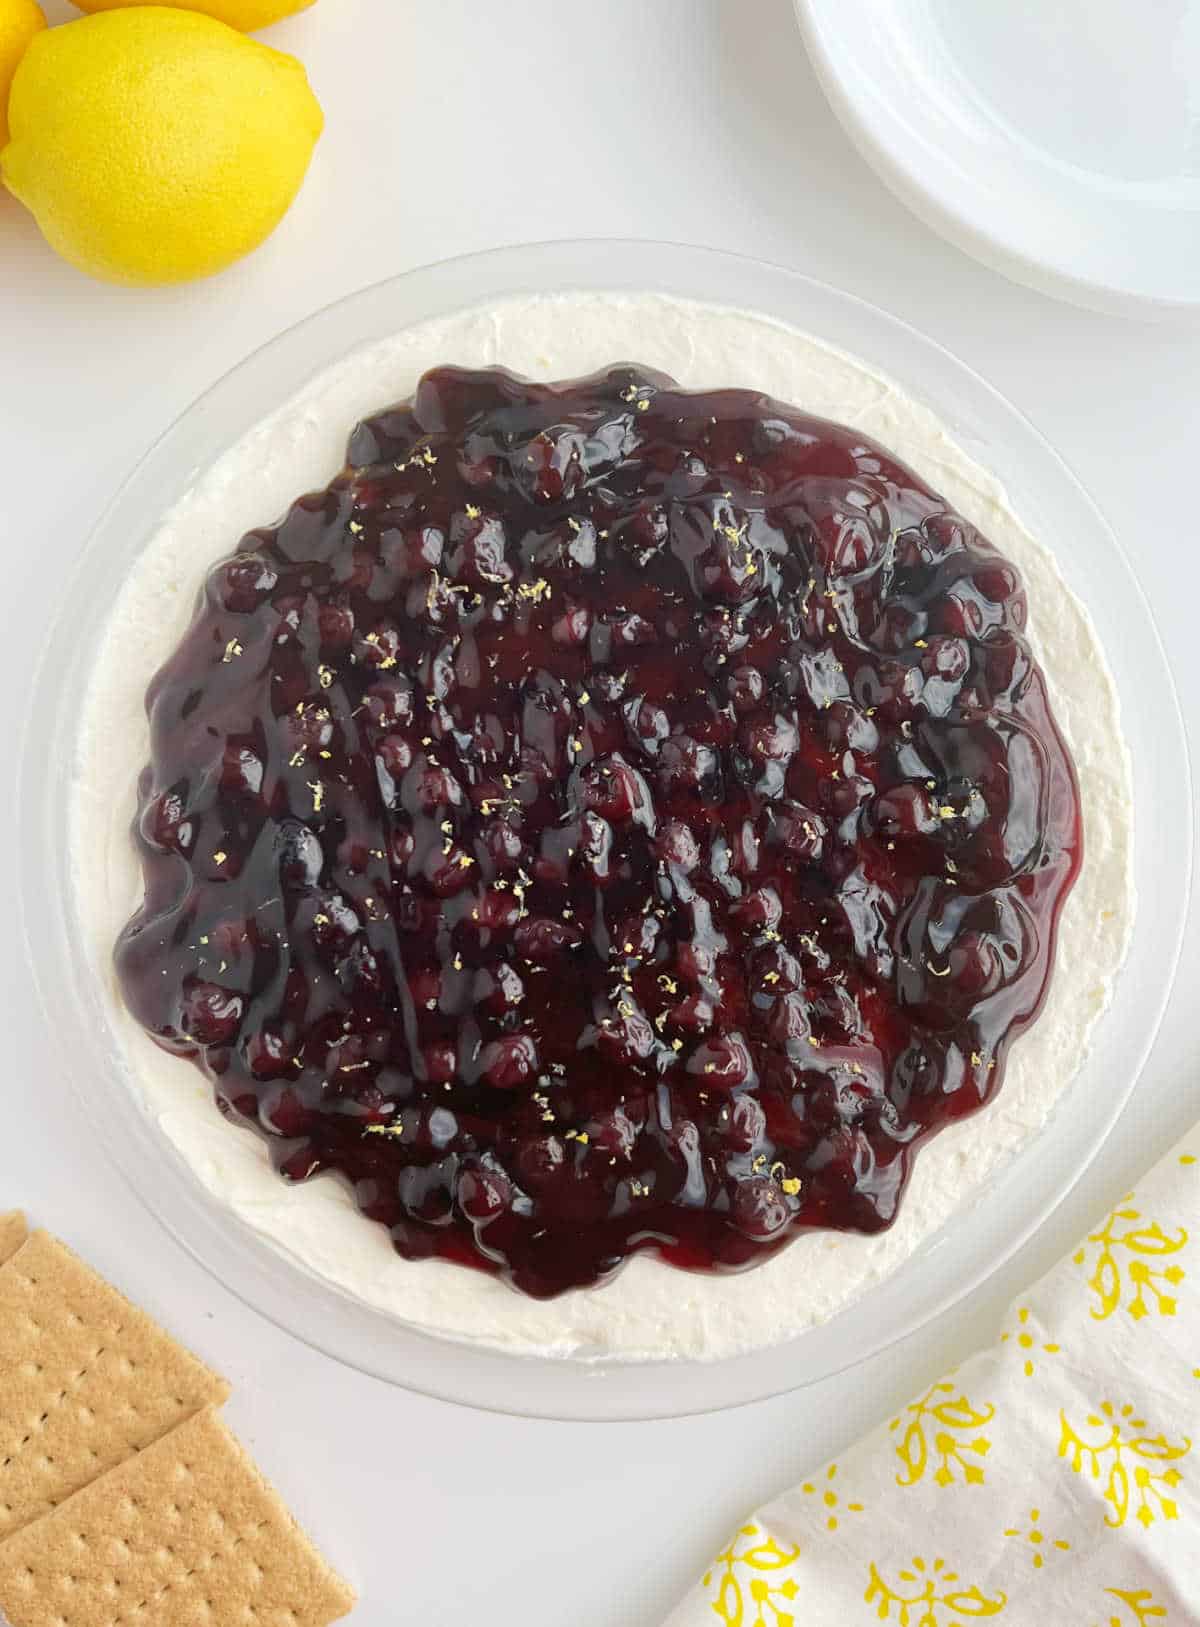 Lemon blueberry cheesecake dip on the table.